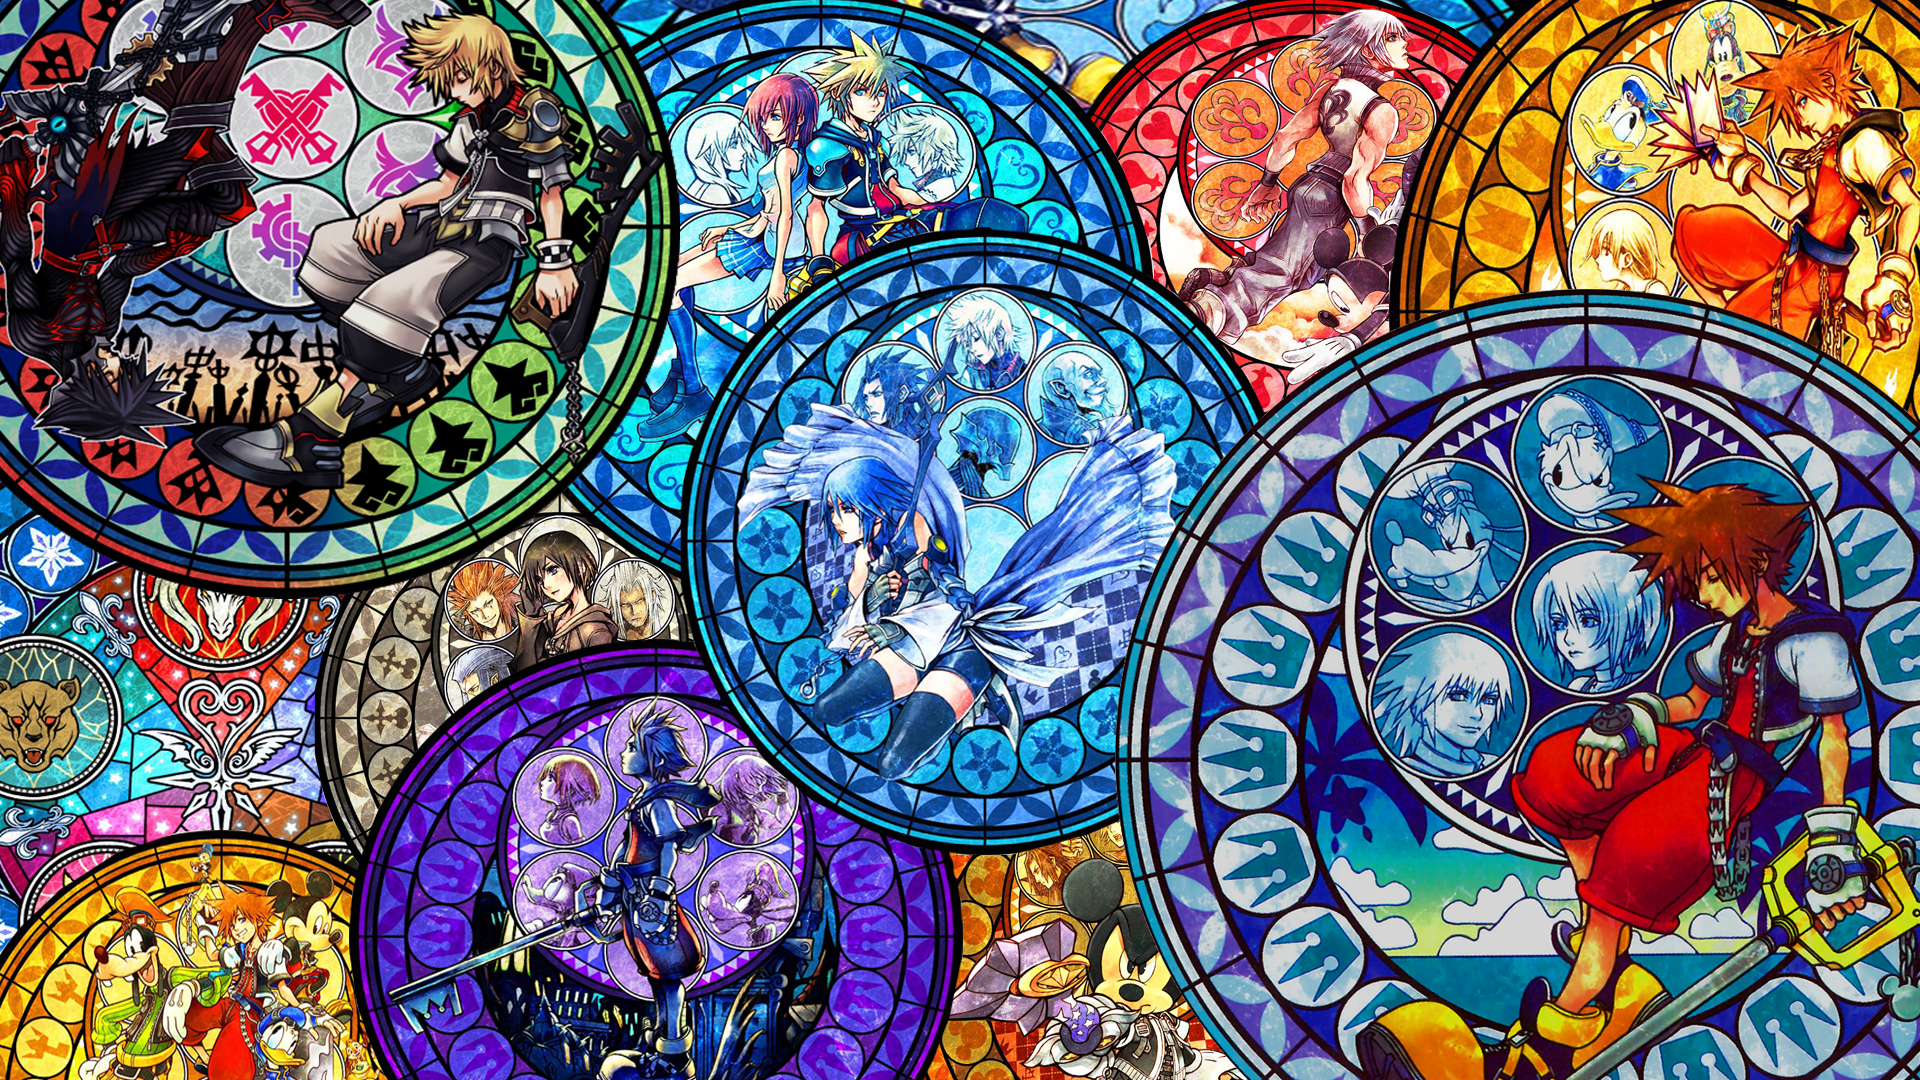 Kingdom hearts stained glass.